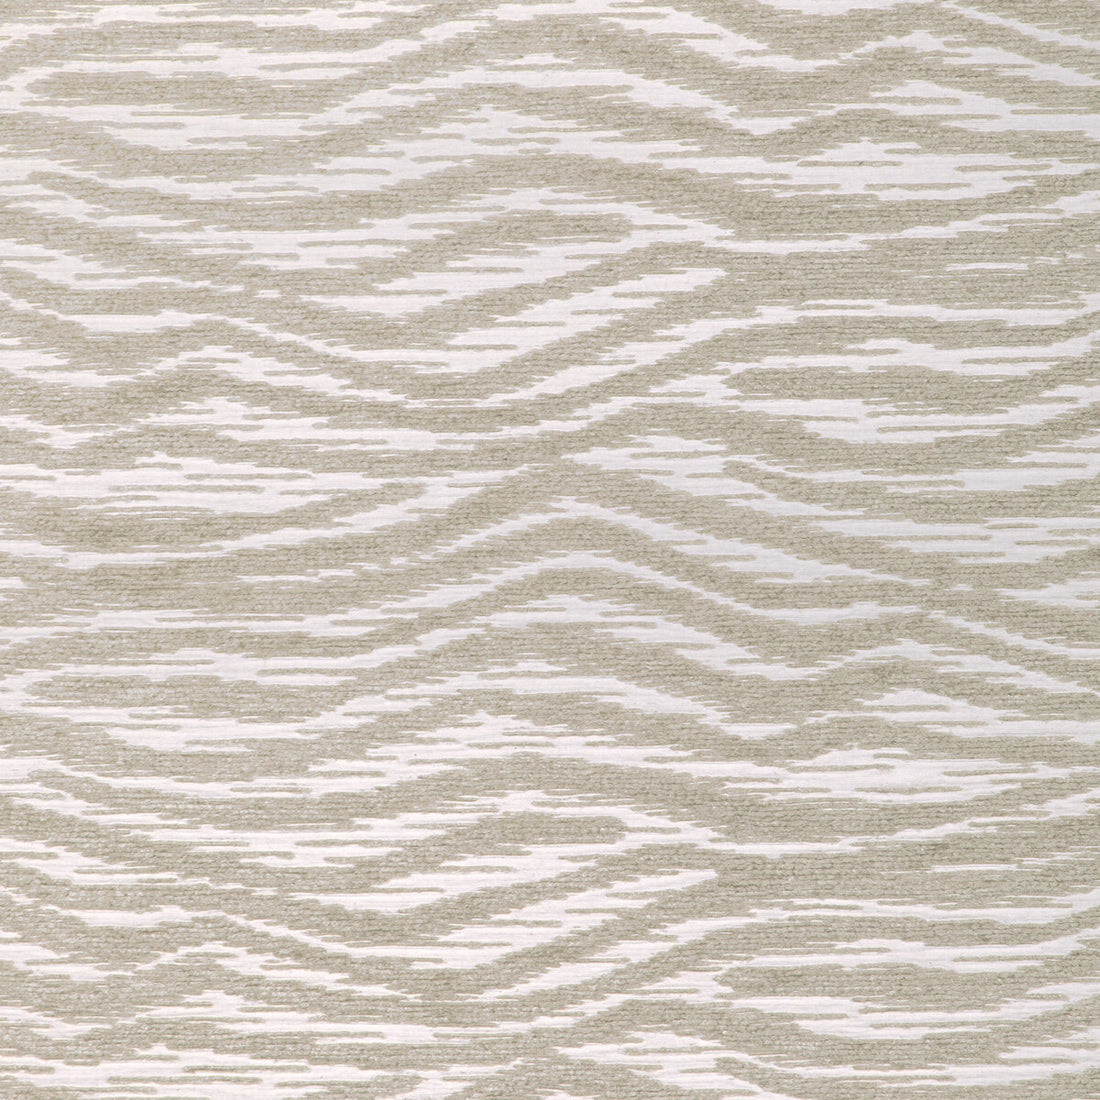 Tuscan Ripples fabric in stone color - pattern 36899.11.0 - by Kravet Couture in the Atelier Weaves collection